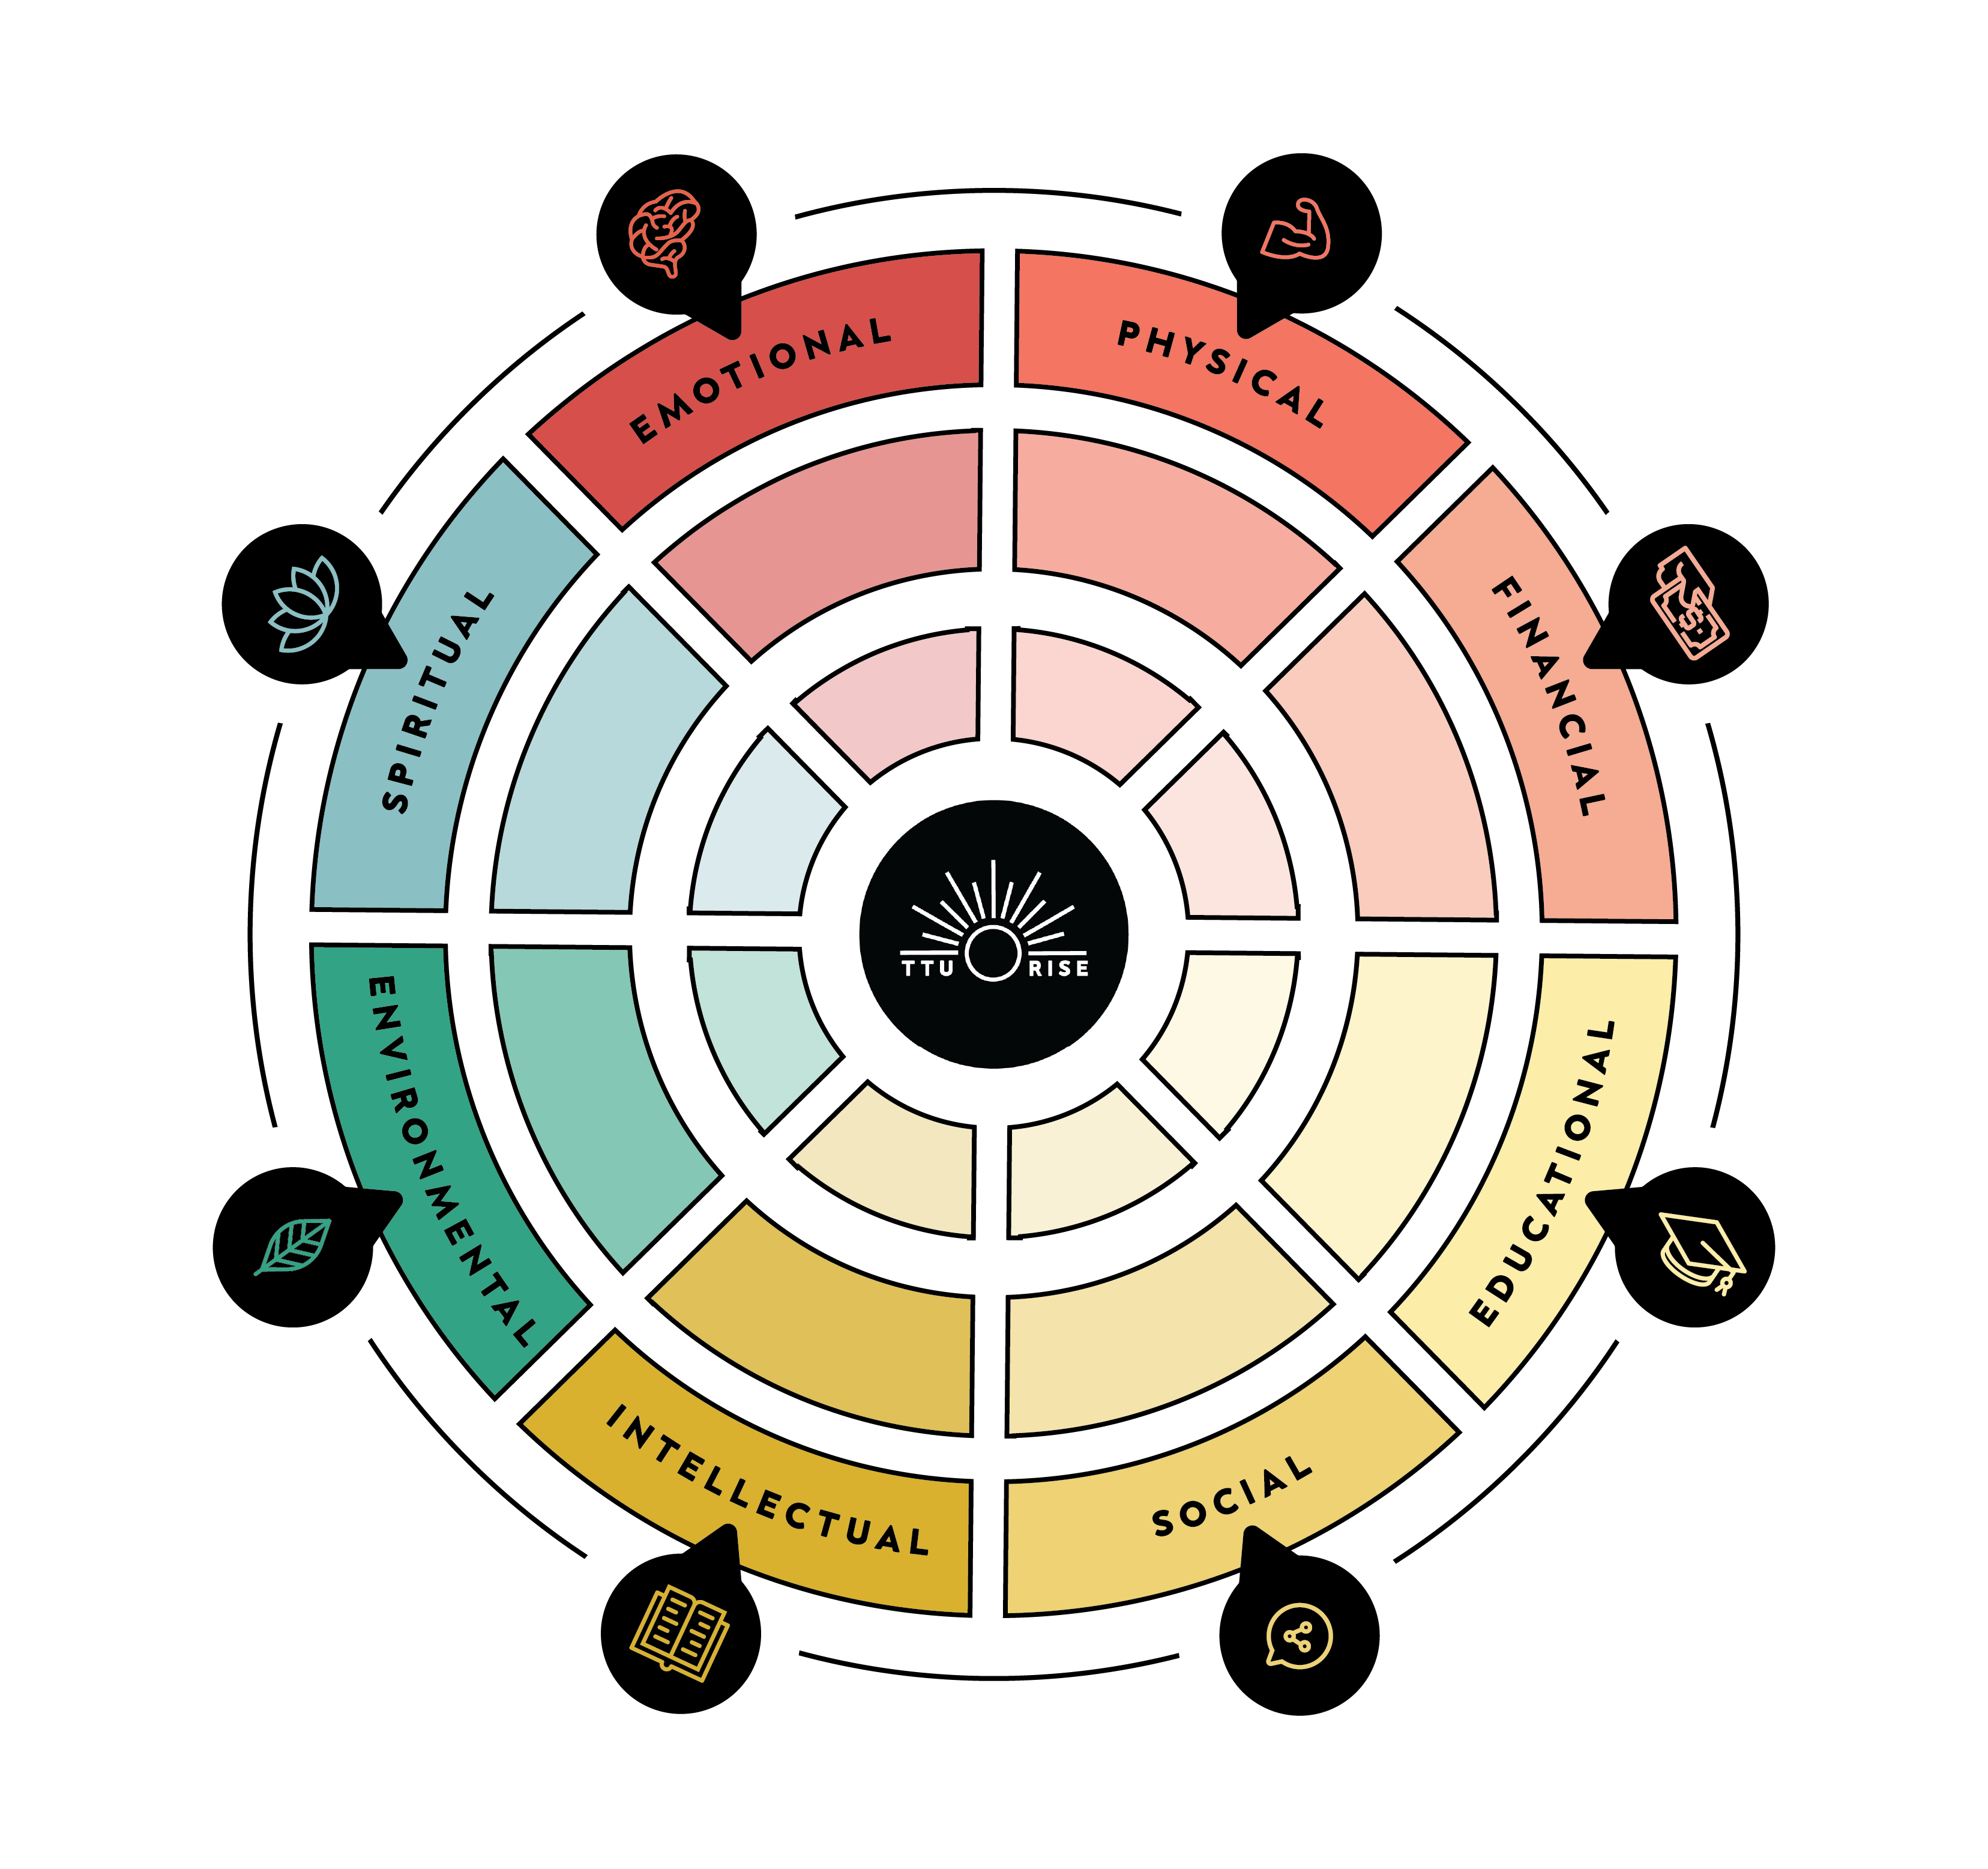 The wellness wheel is a multi-dimensional tool used to identify areas of wellness that may be lacking.